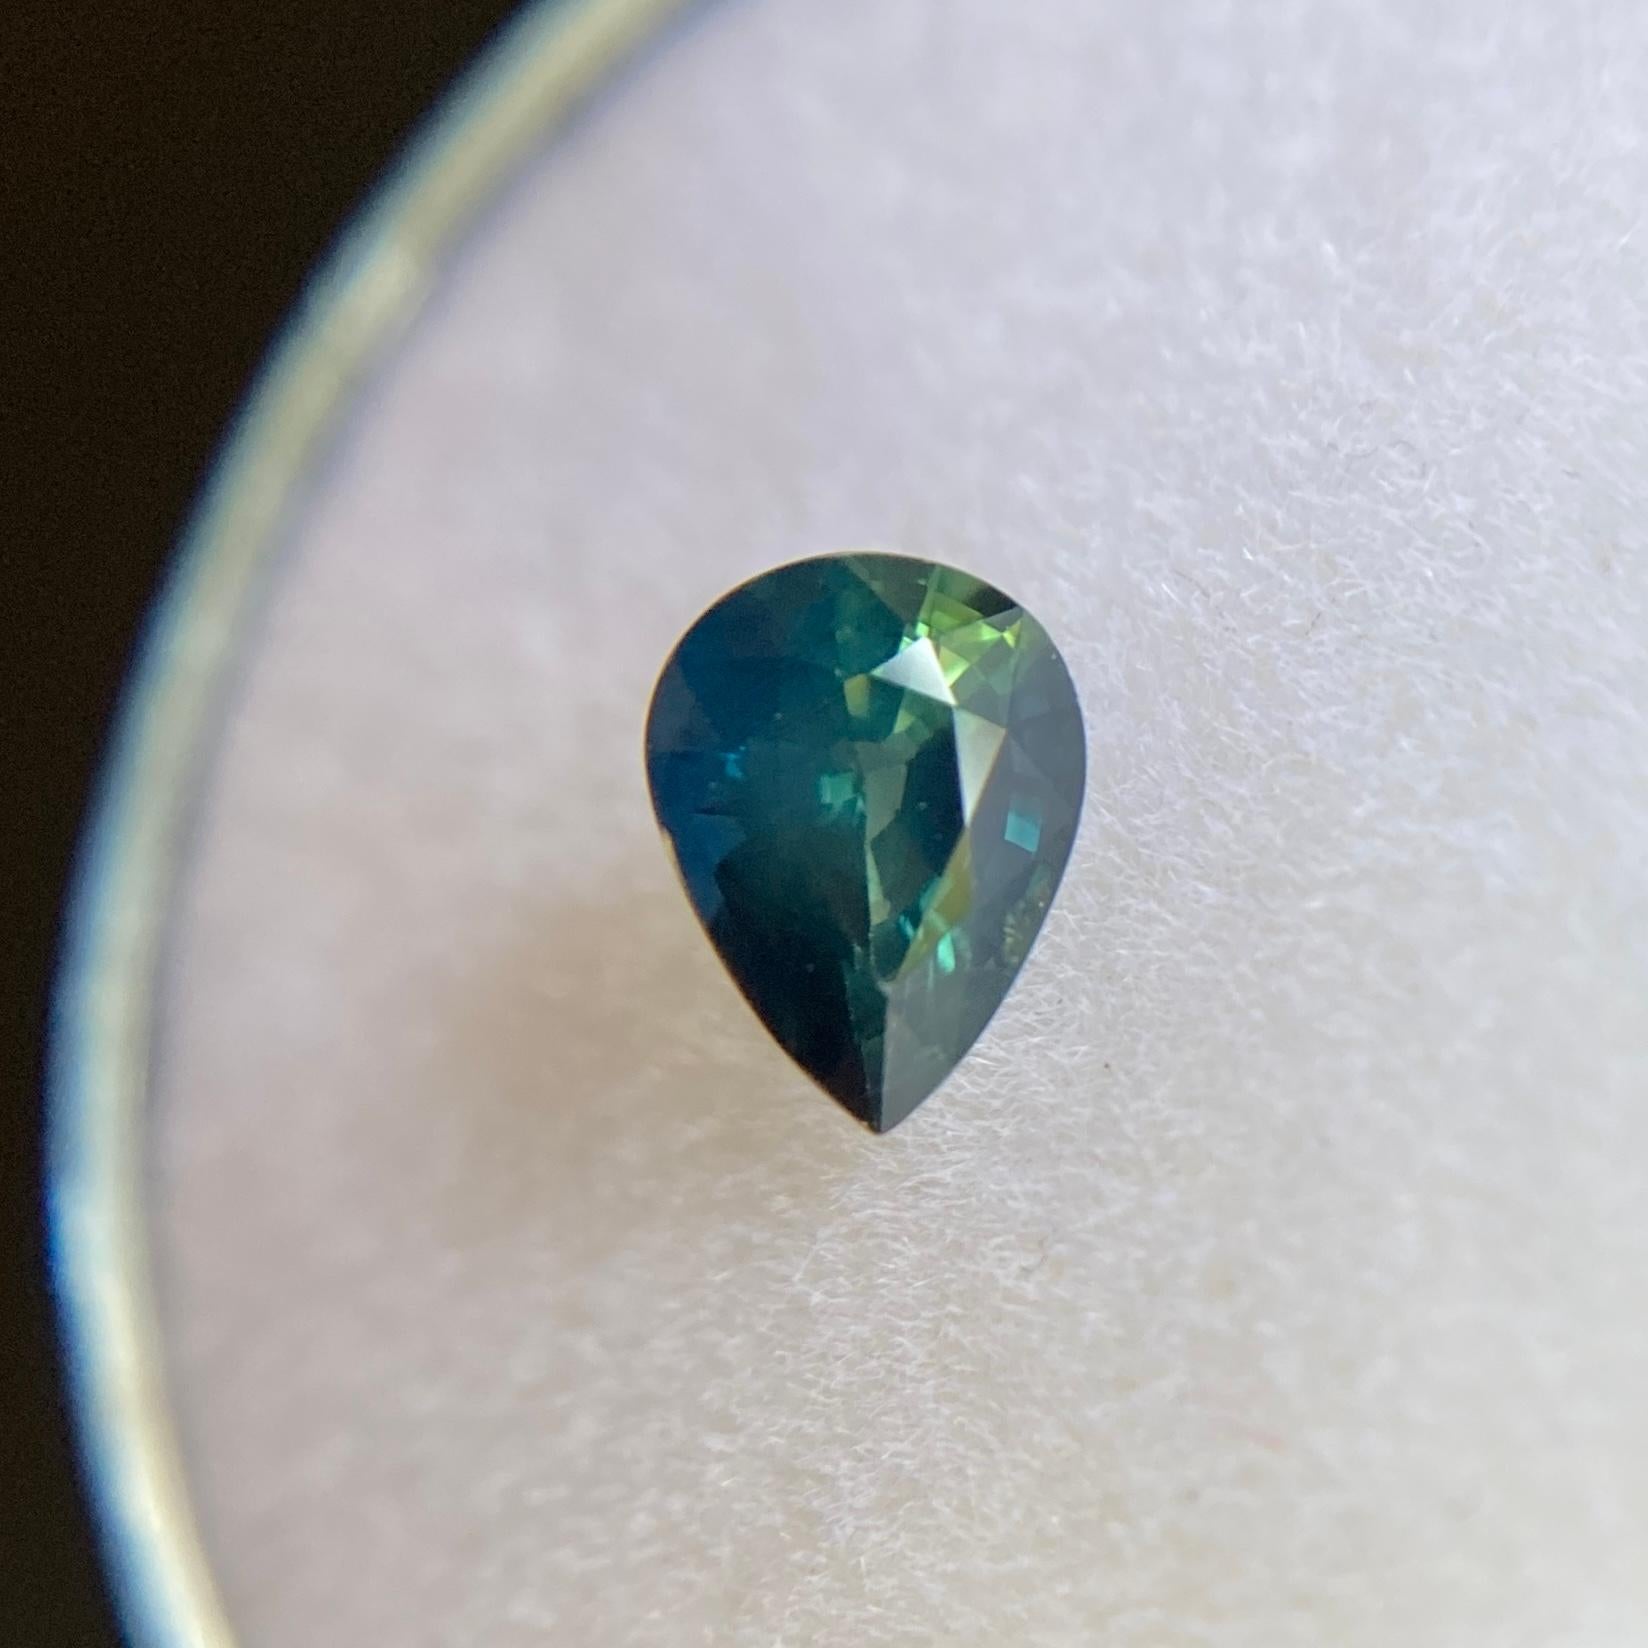 Natural Greenish Yellow Blue Parti-Colour Sapphire Gemstone.

0.75 Carat with a beautiful and unique greenish yellow blue colour and very good clarity, a clean stone with only some small natural inclusions visible when looking closely.

Also has an